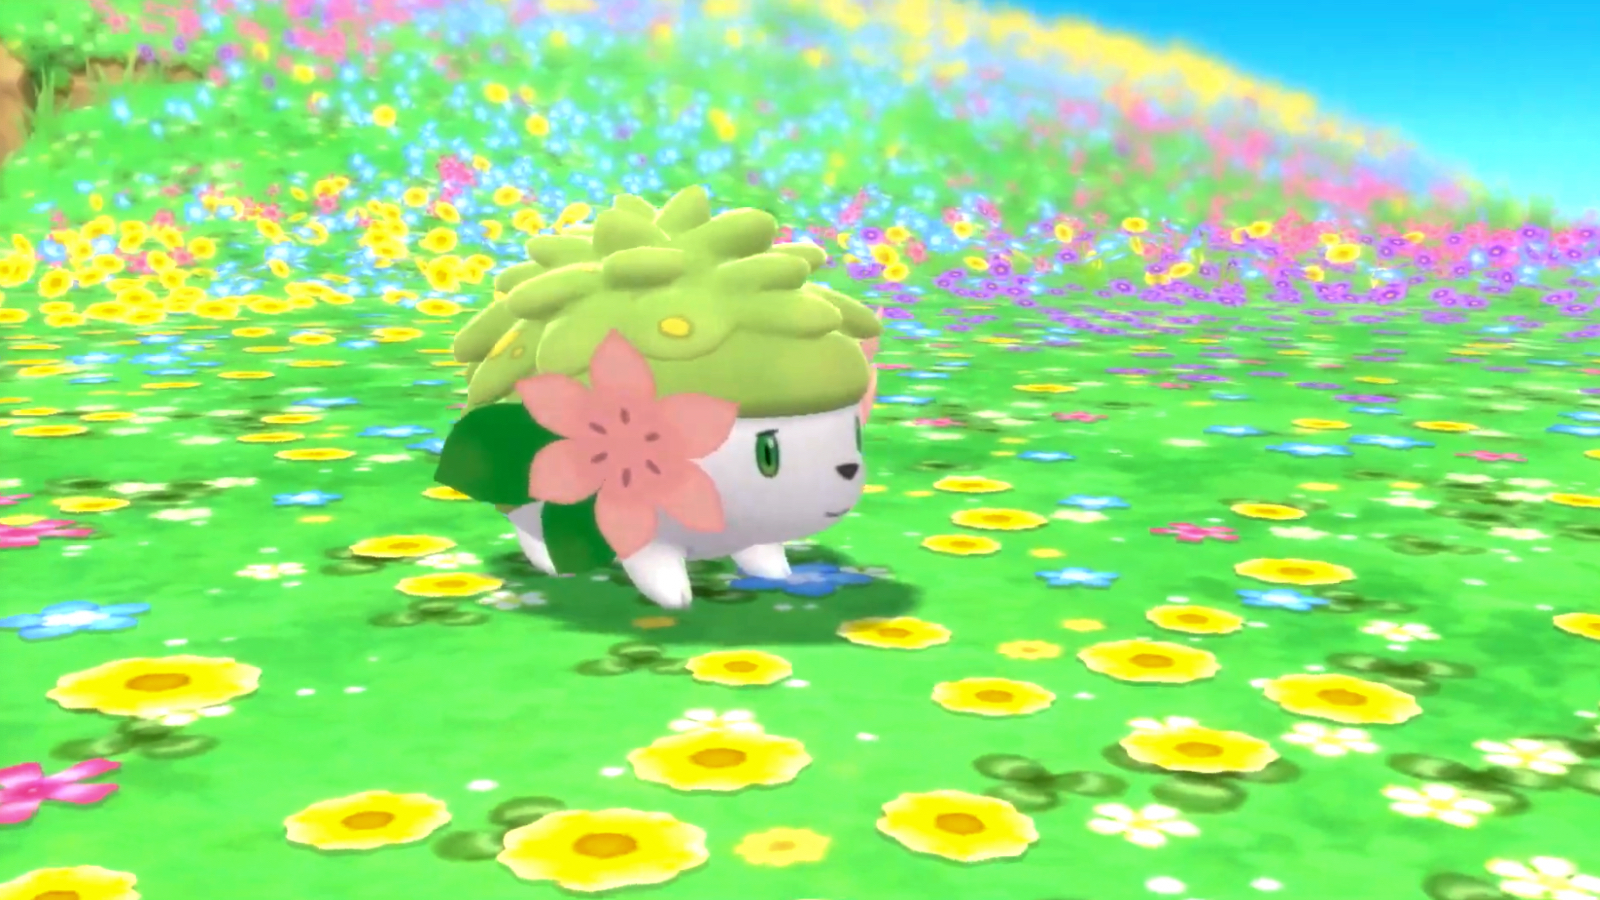 Reminder: Mythical Pokémon Shaymin is Up for Grabs Until 24th July